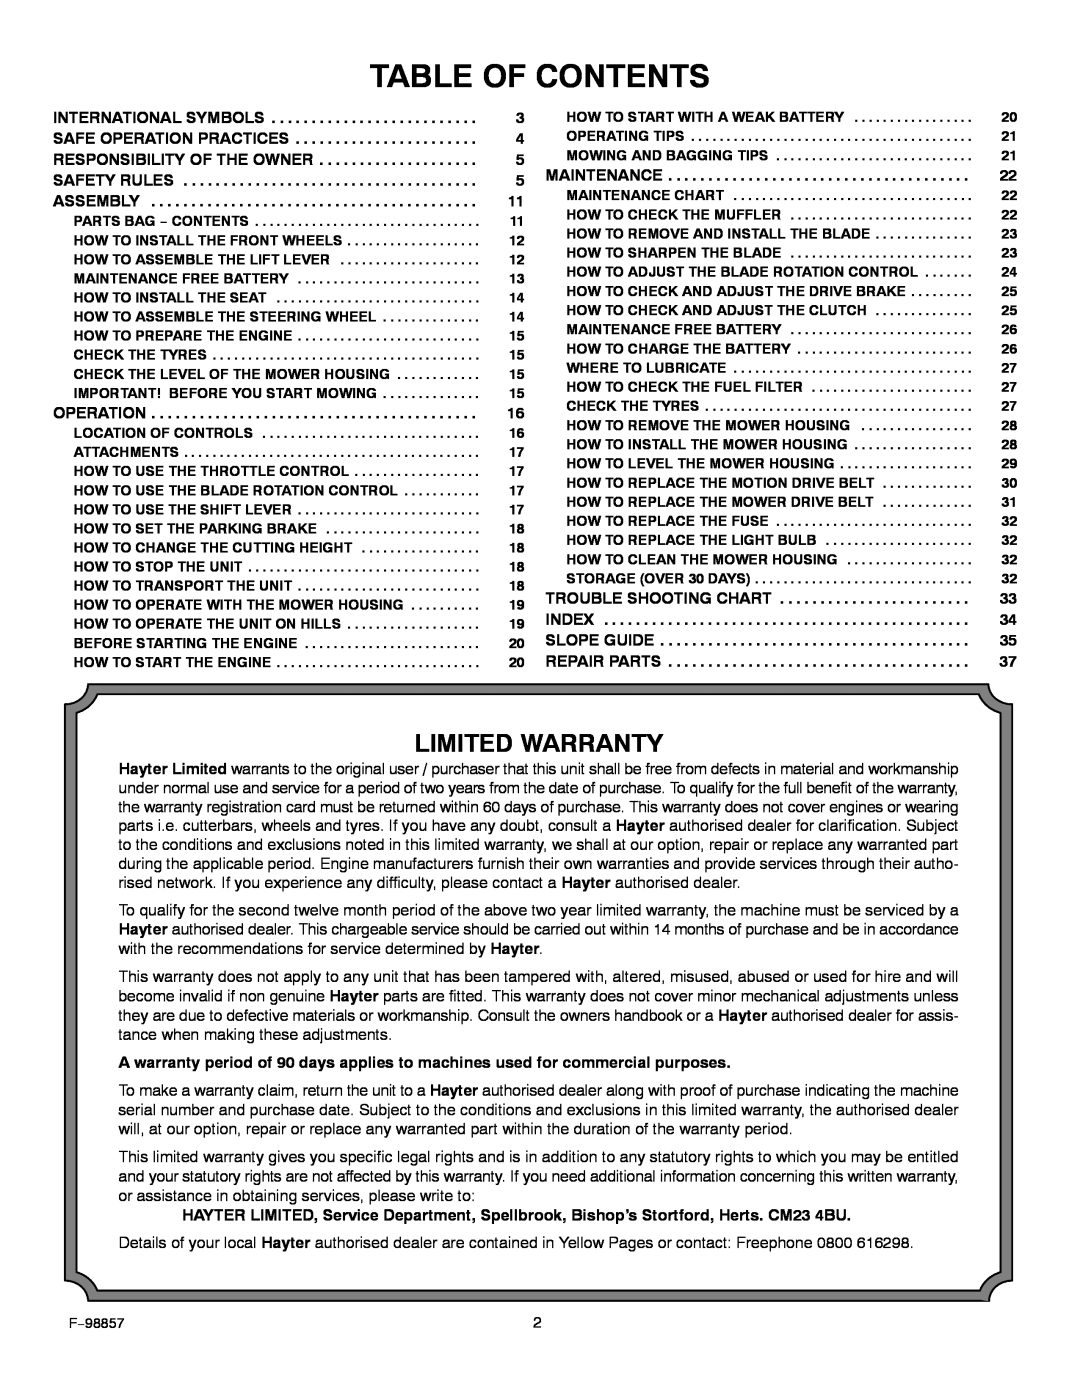 Hayter Mowers 30-Dec manual Table Of Contents, Limited Warranty 